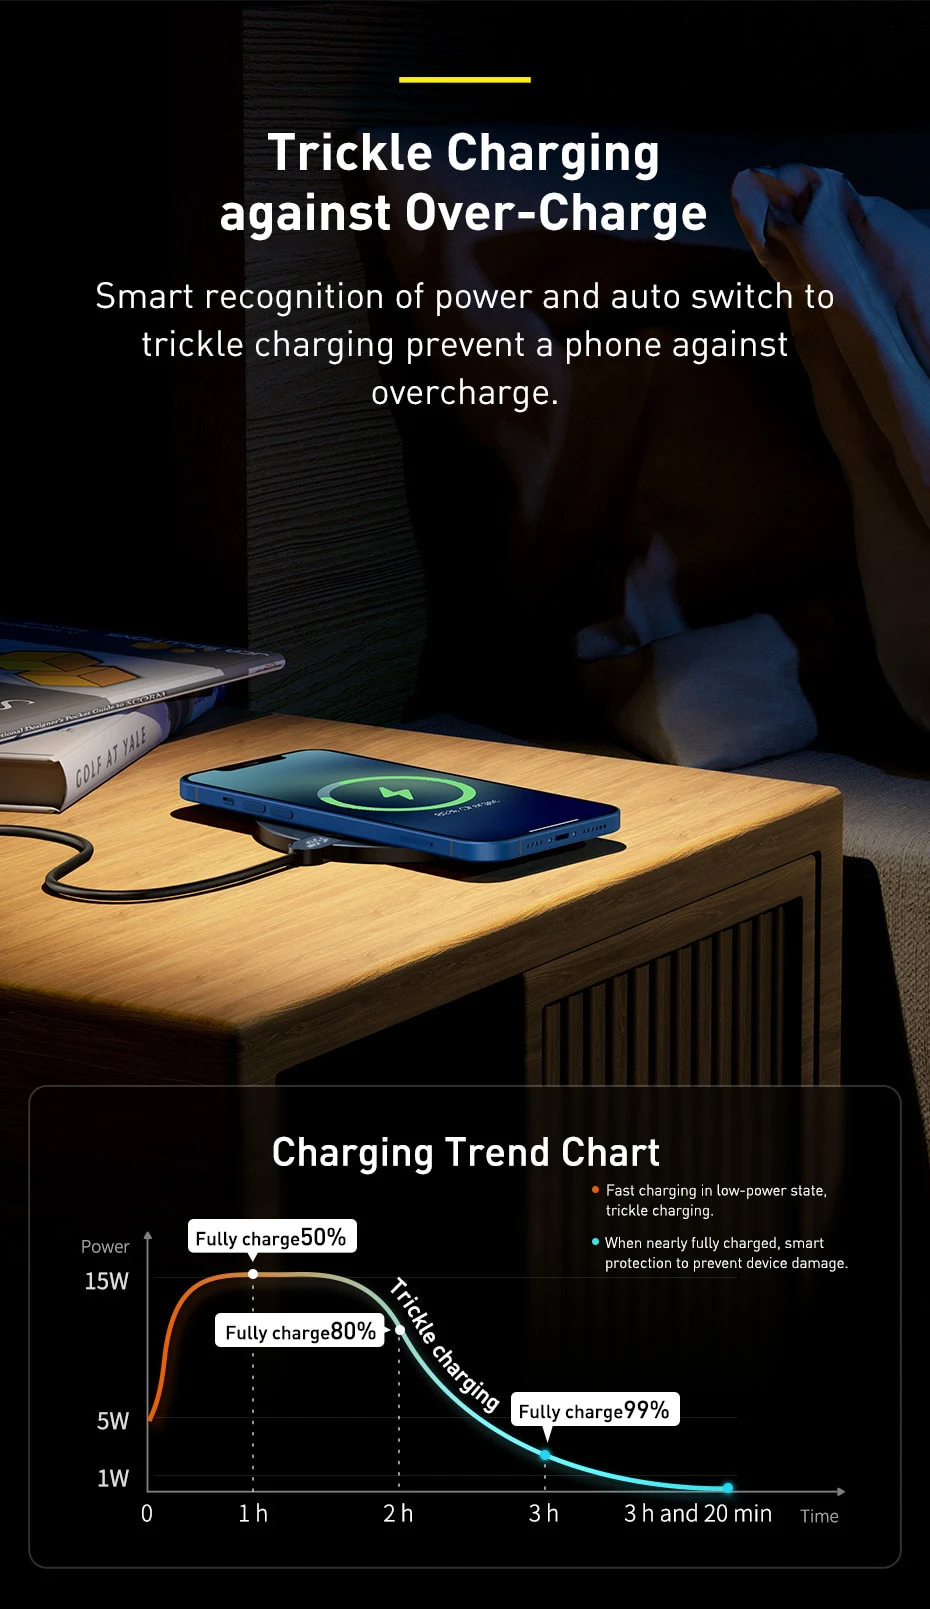 Smart recognition of power and auto switch to trickle charging prevent a phone against overcharge.